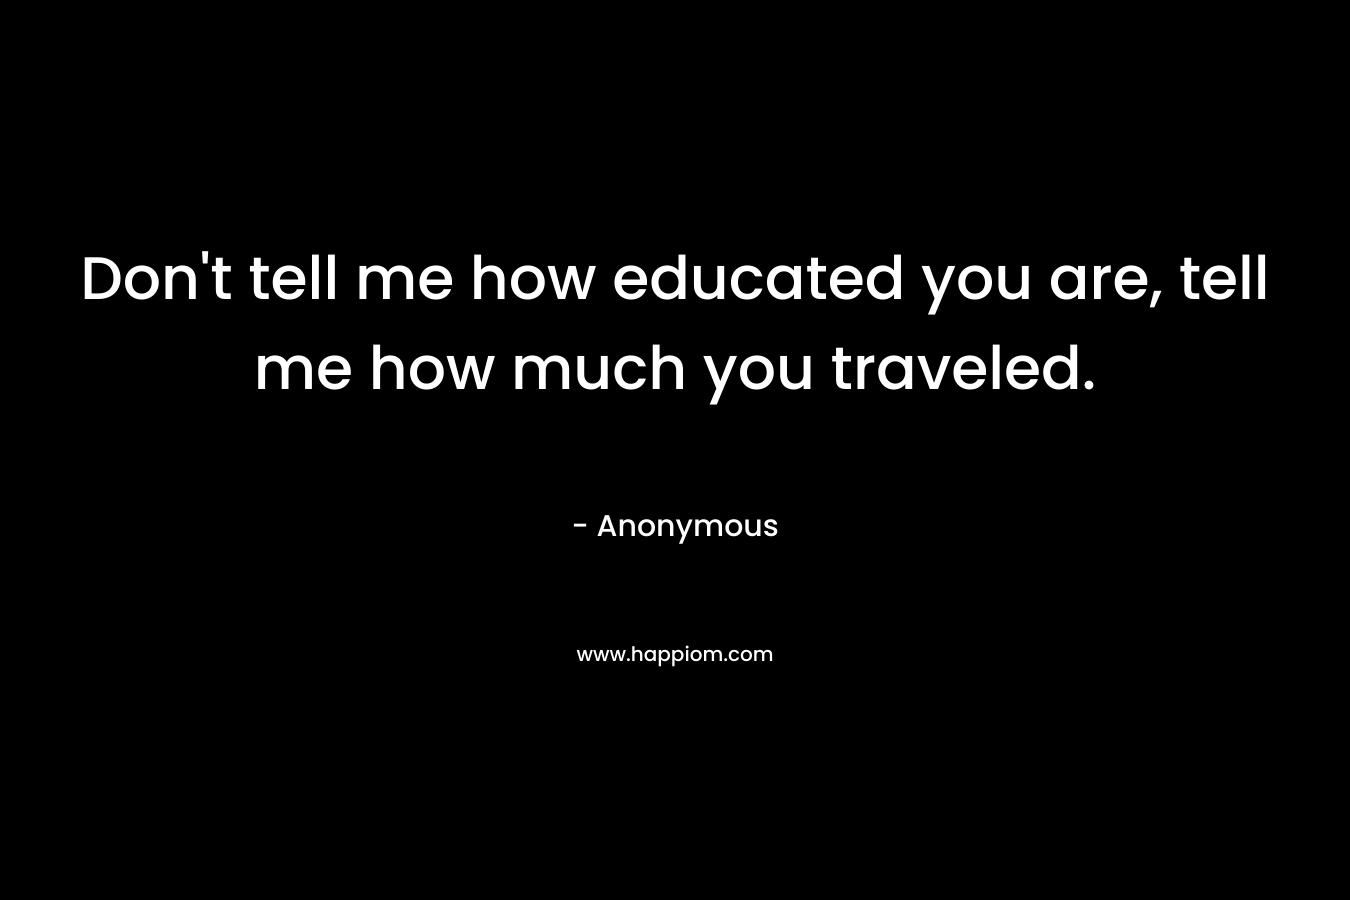 Don’t tell me how educated you are, tell me how much you traveled. – Anonymous